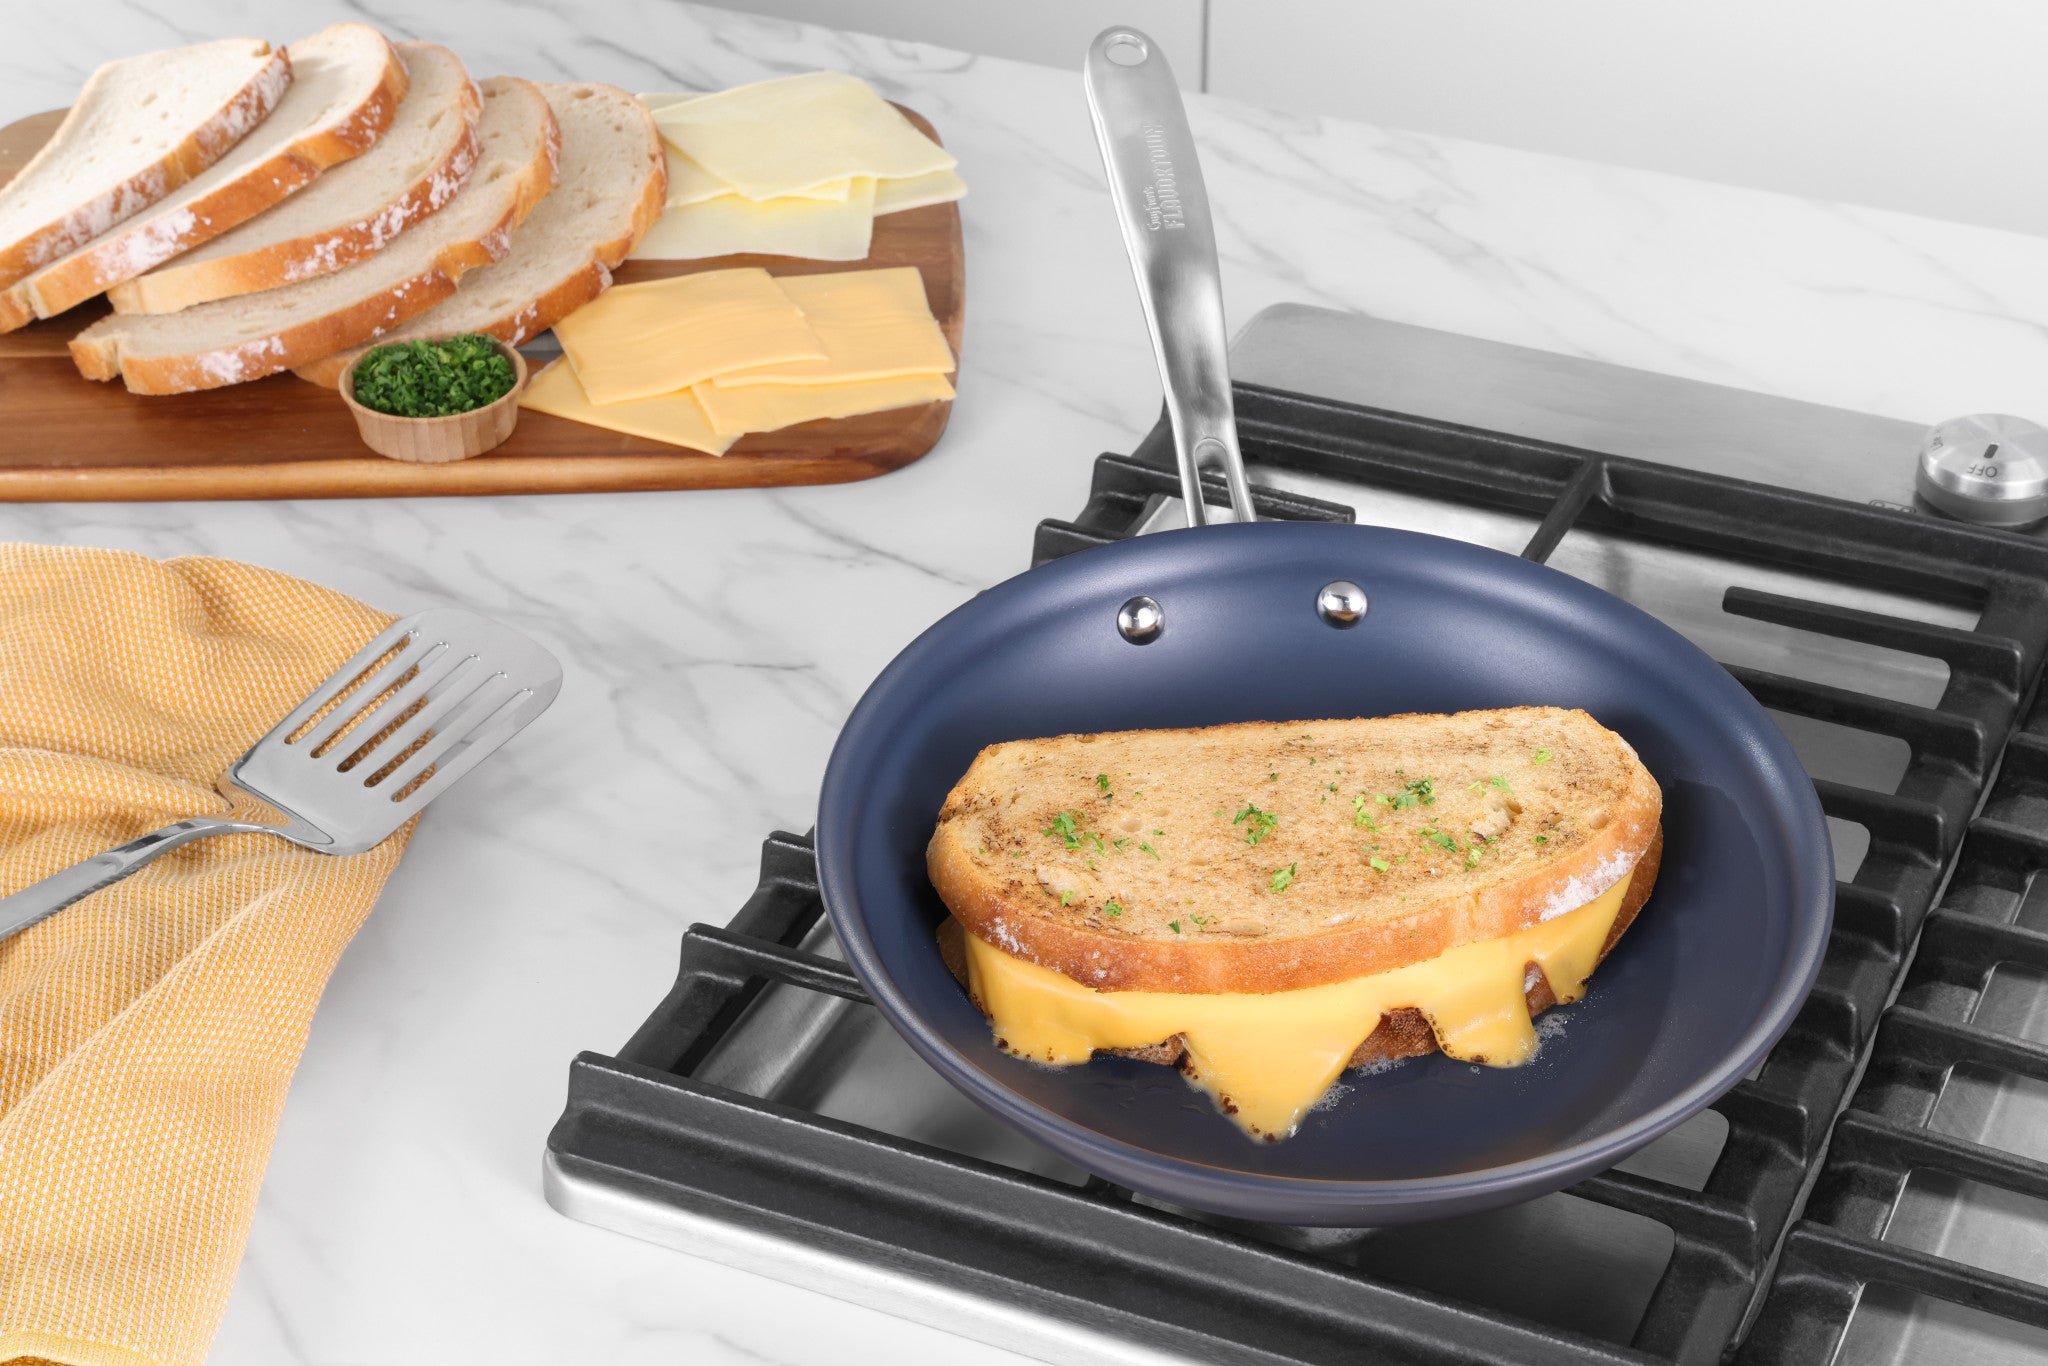 Guy Fieri's Flavortown Laser Titanium 8.5in Frying Pan with Grilled Cheese